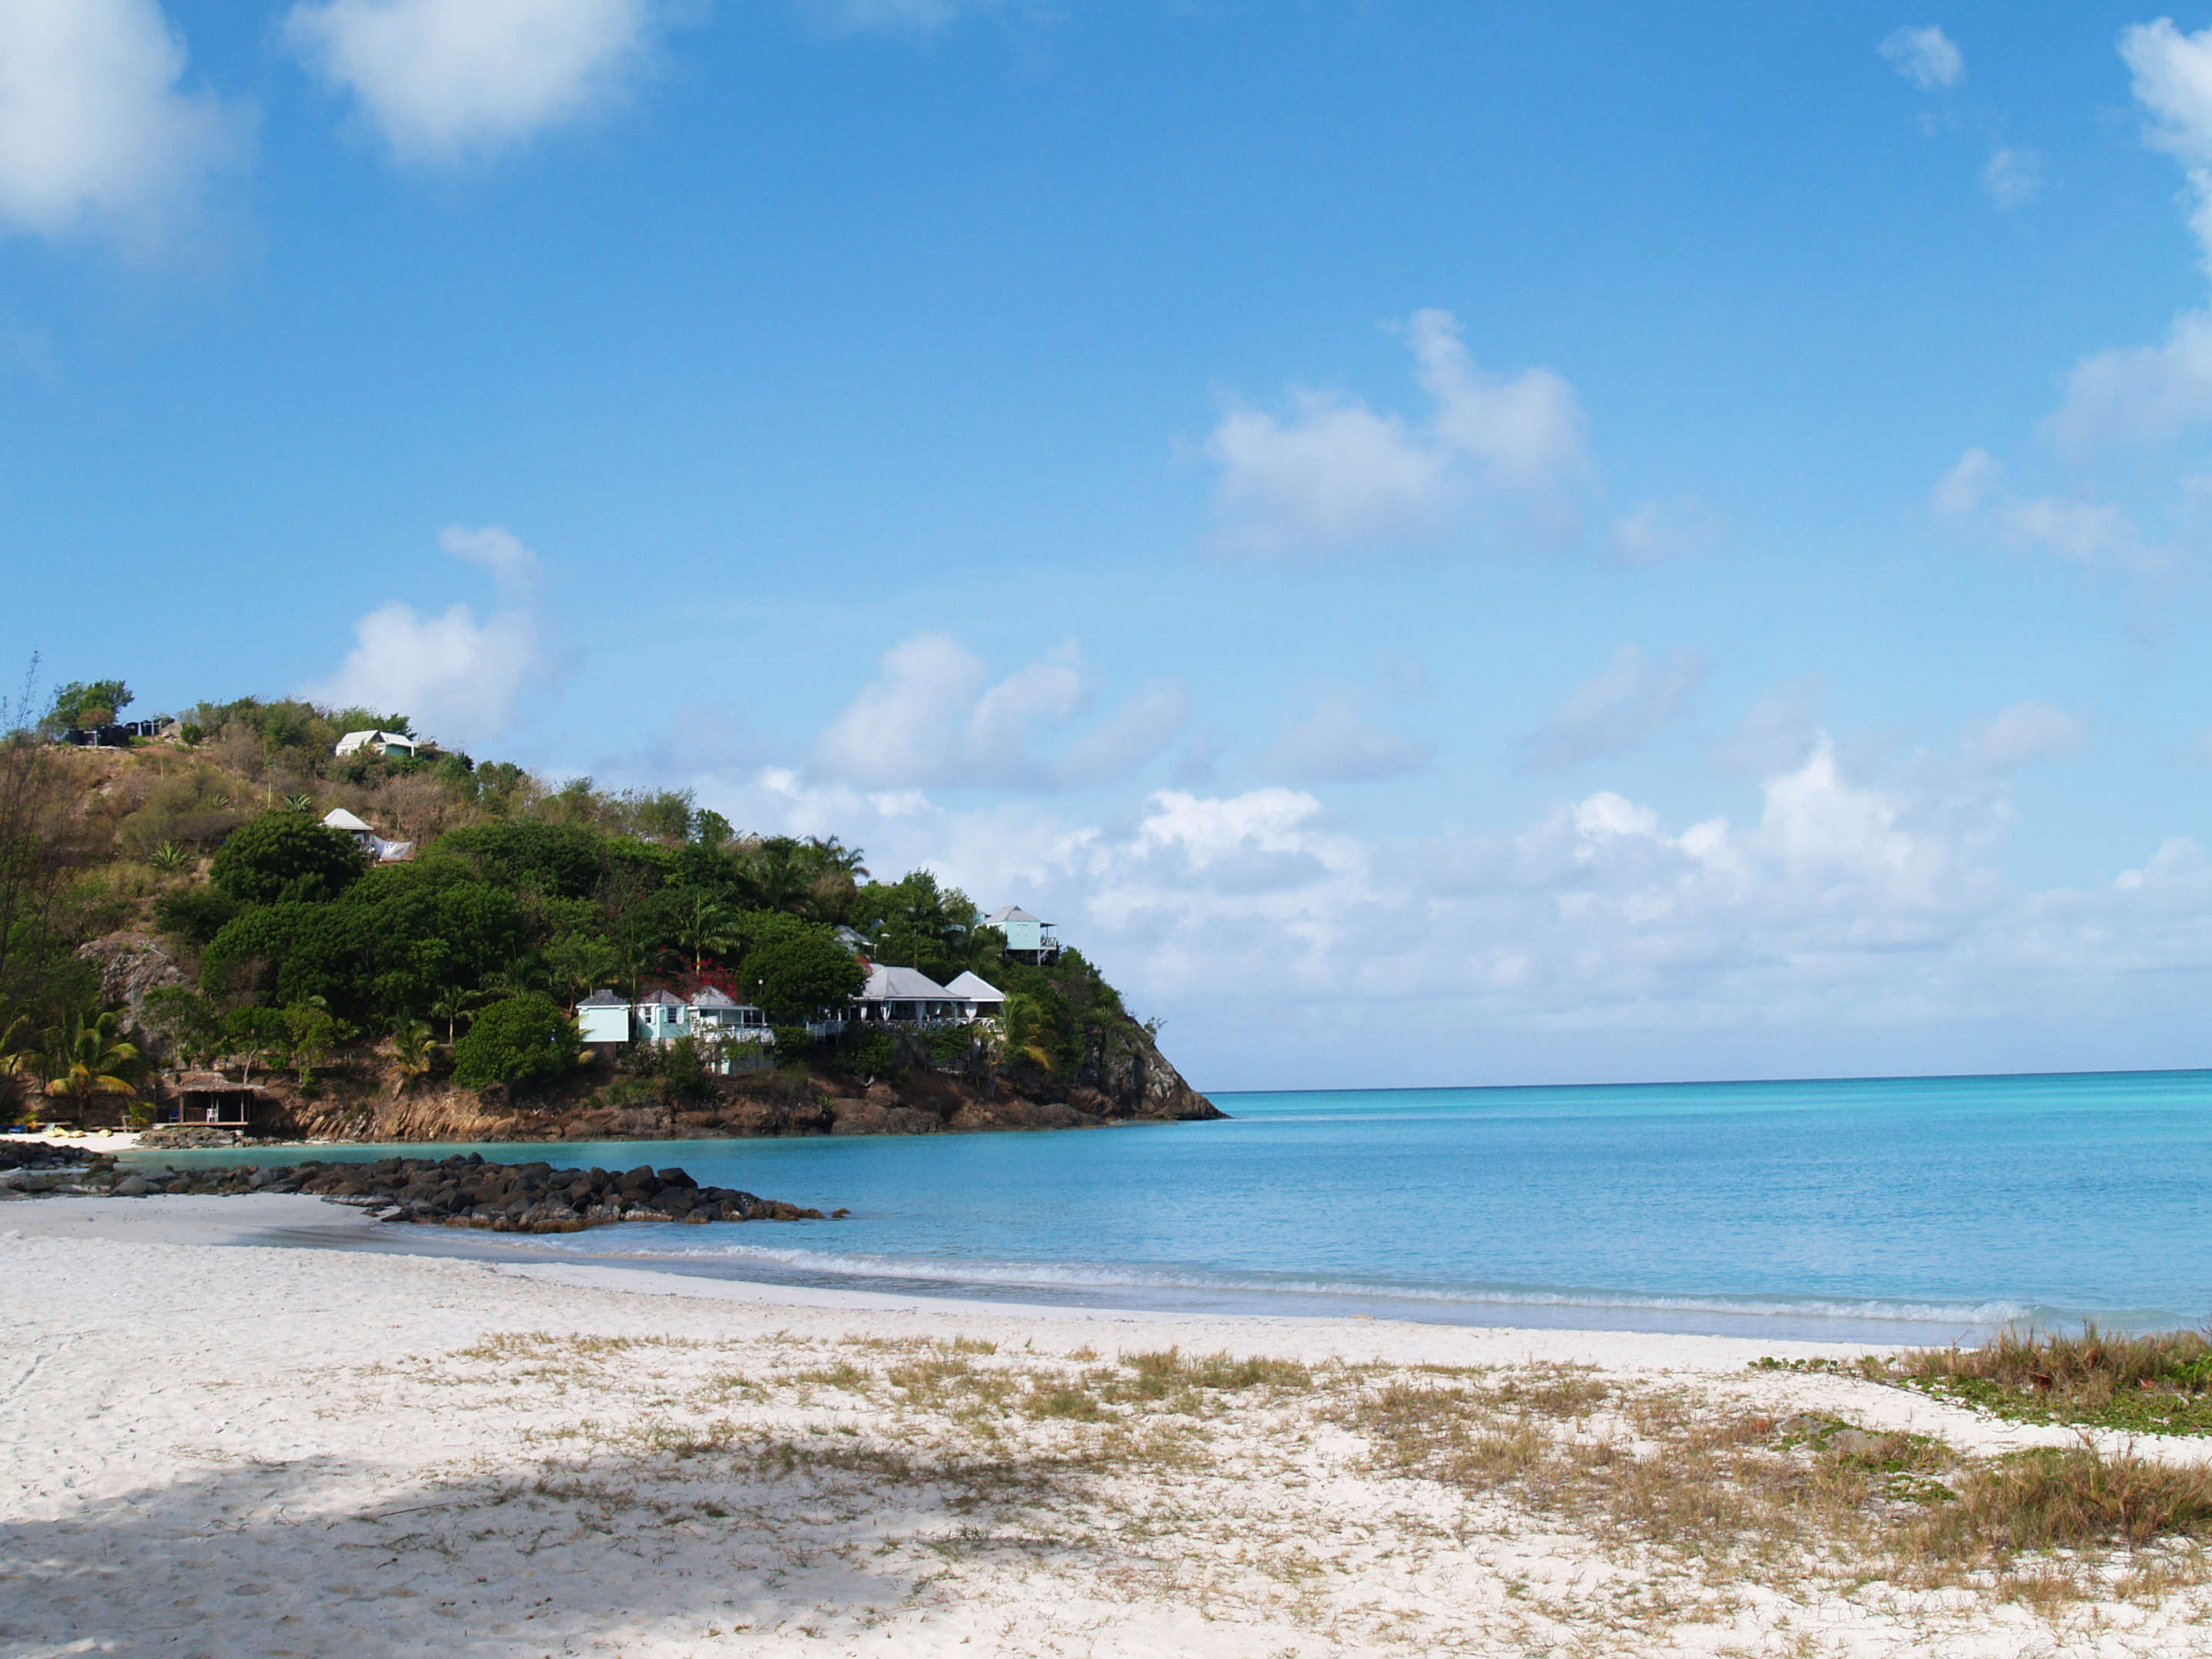 View from a beach in Antigua & Barbuda